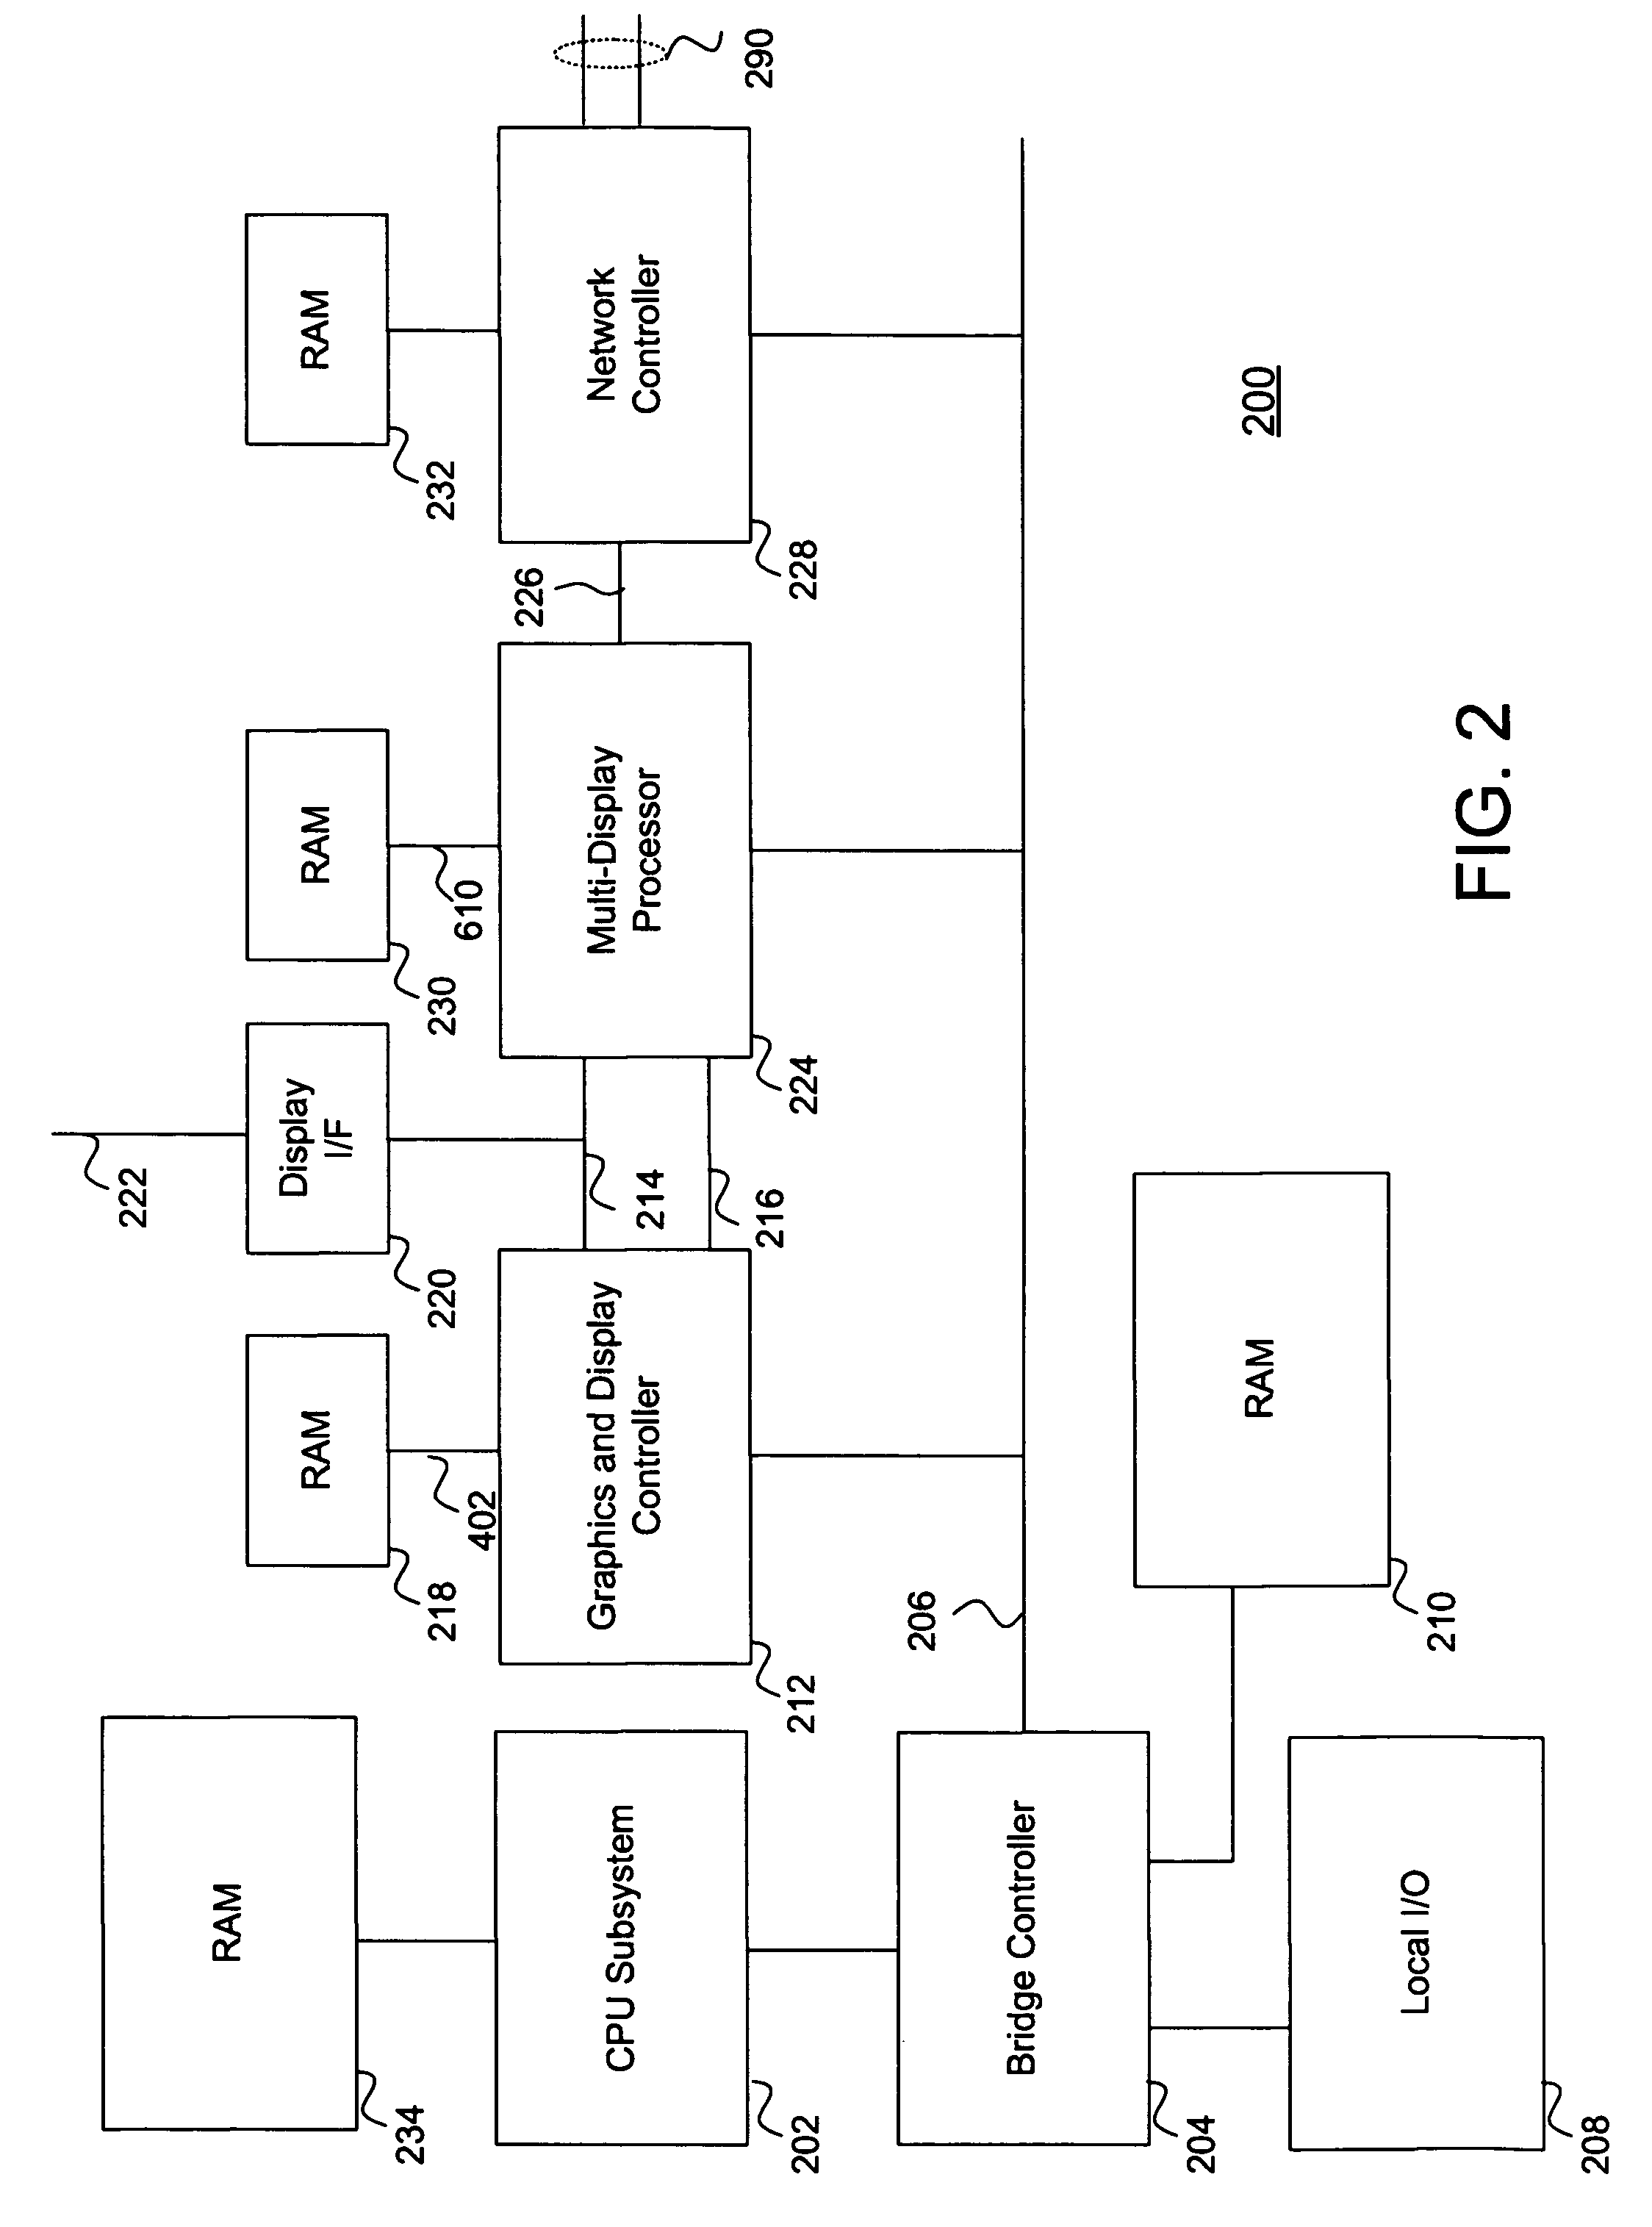 Computer system for supporting multiple remote displays